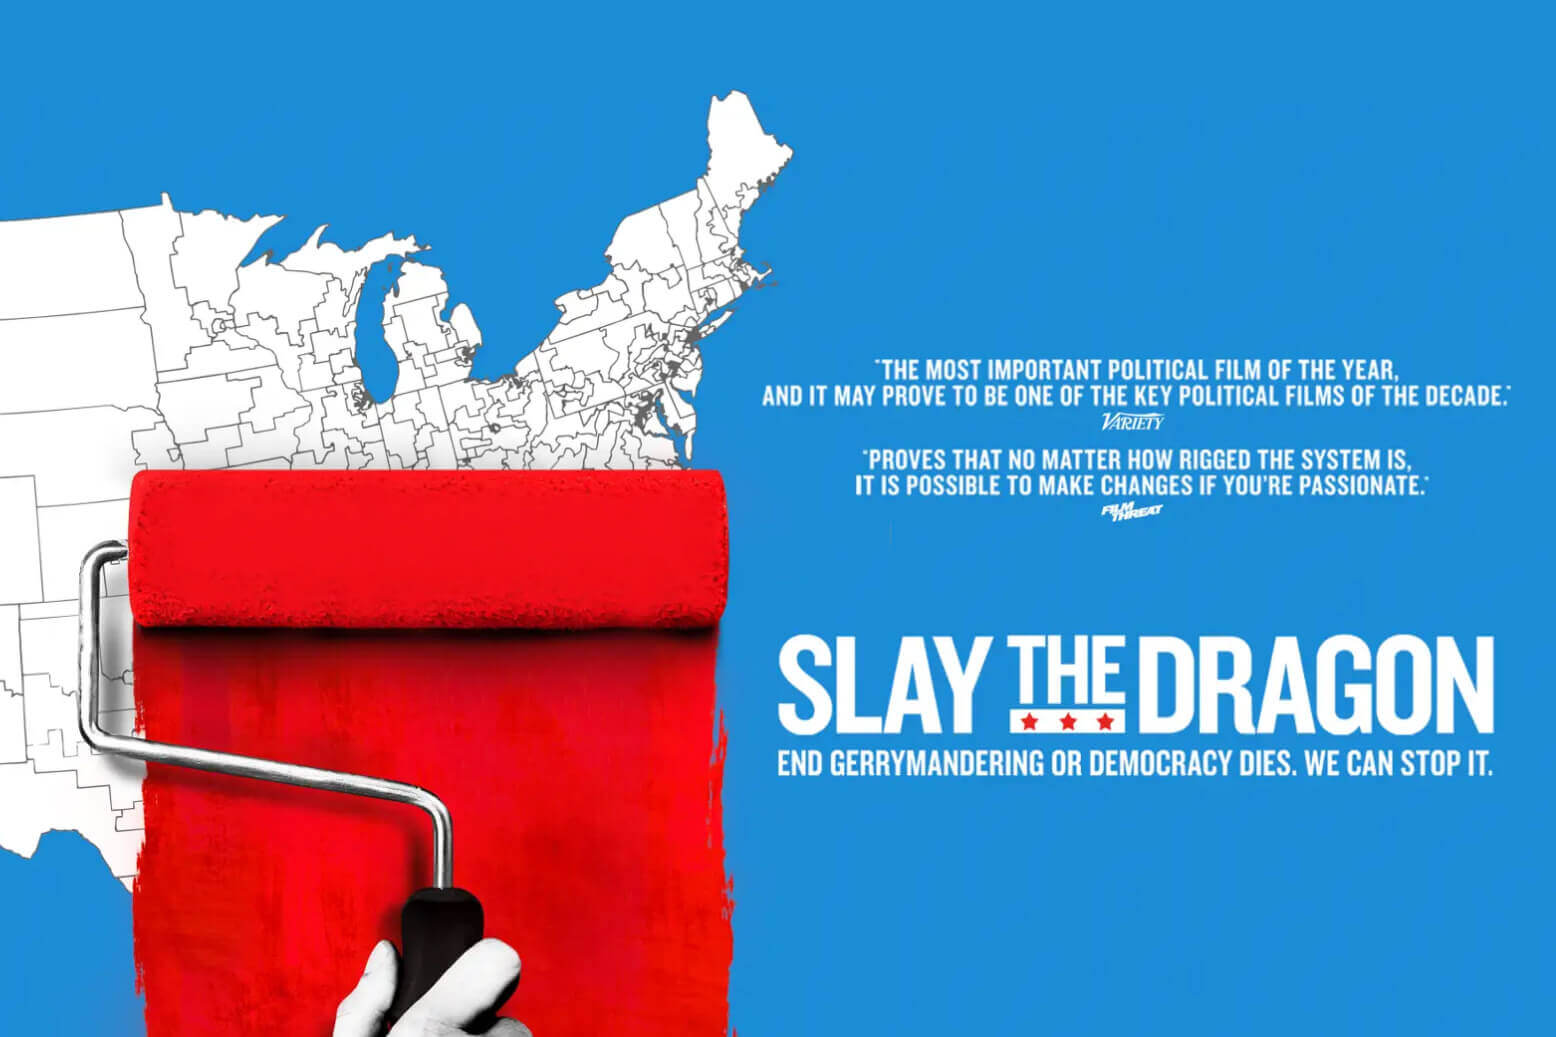 Virtual Screening & Discussion Shine a Light on Gerrymandering Shenandoah and Alamo Drafthouse Cinema Team to Present Documentary ‘Slay the Dragon’ and Related Discussion With Experts